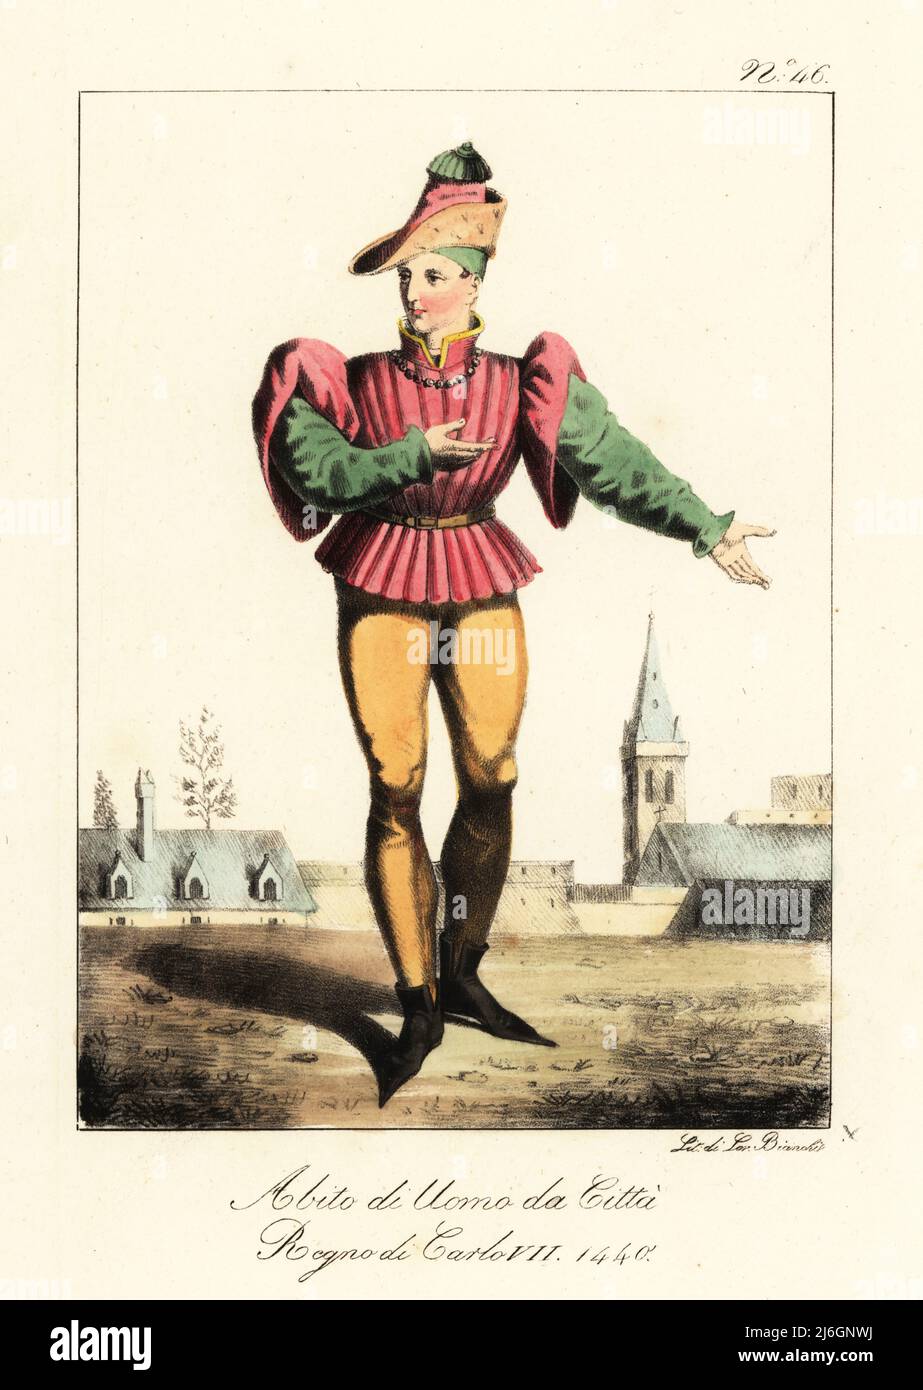 Costume of a French bourgeois man, reign of King Charles VII, 1440. In peaked cap, pleated doublet with puff sleeves, hose, and bootlets. Costume des hommes a la ville. Regne de Charles VII. Handcoloured lithograph by Lorenzo Bianchi after Hippolyte Lecomte from Costumi civili e militari della monarchia francese dal 1200 al 1820, Naples, 1825. Italian edition of Lecomte’s Civilian and military costumes of the French monarchy from 1200 to 1820. Stock Photo